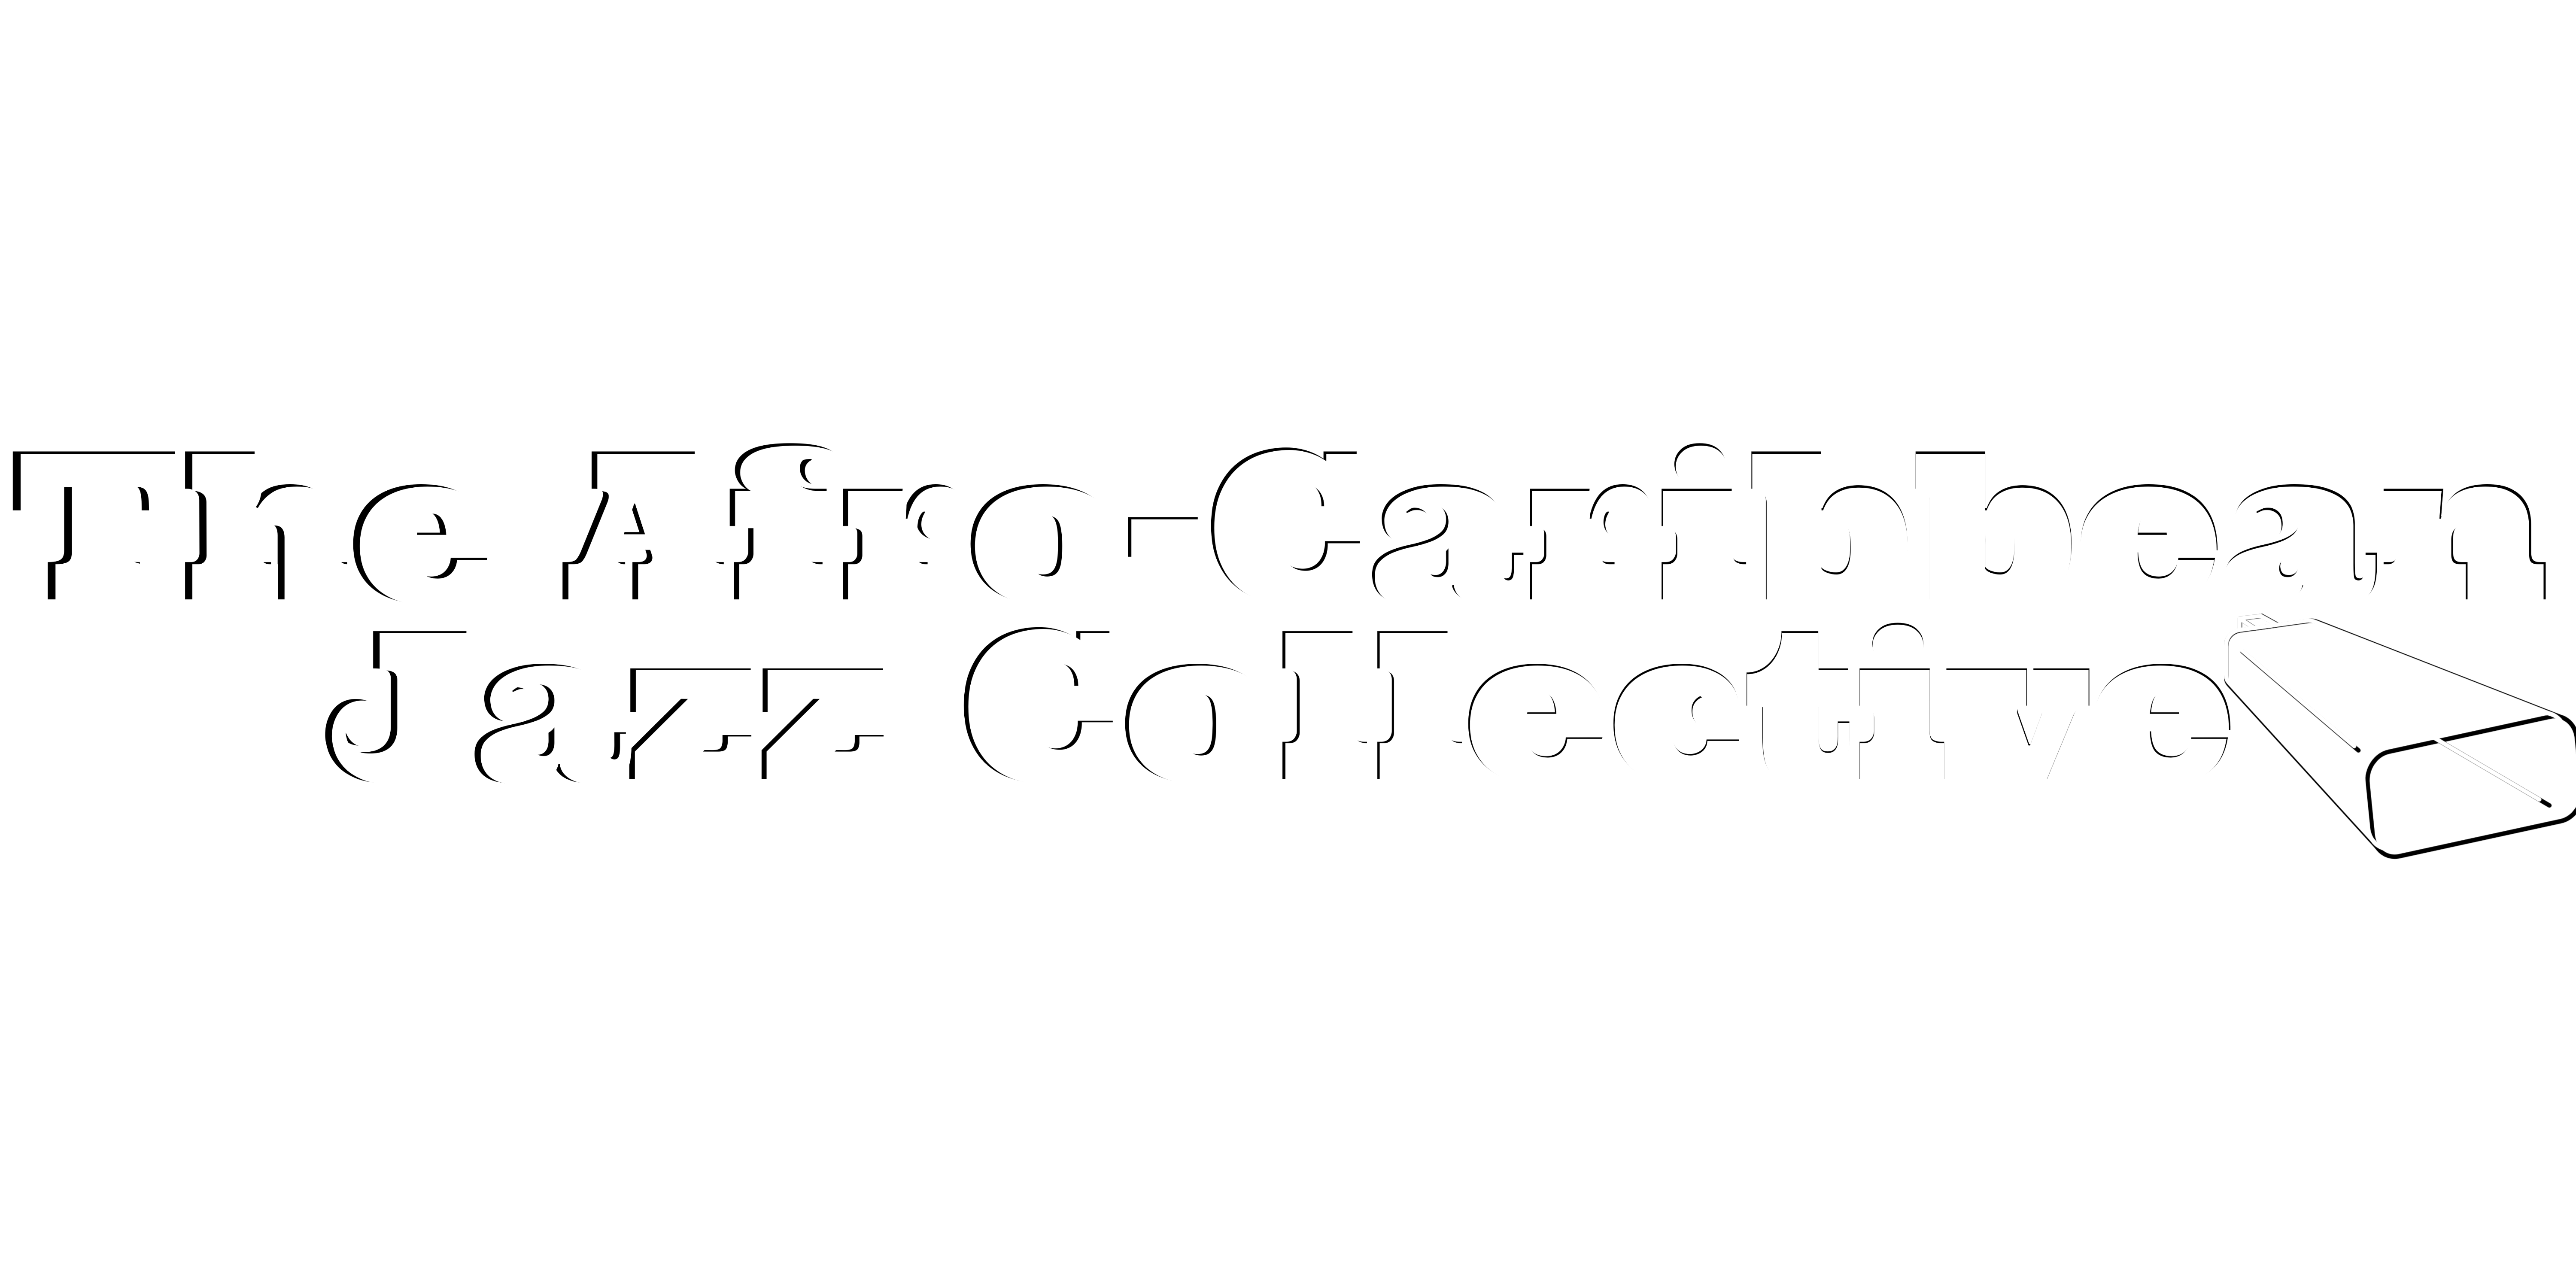 The Afro-Caribbean Jazz Collective